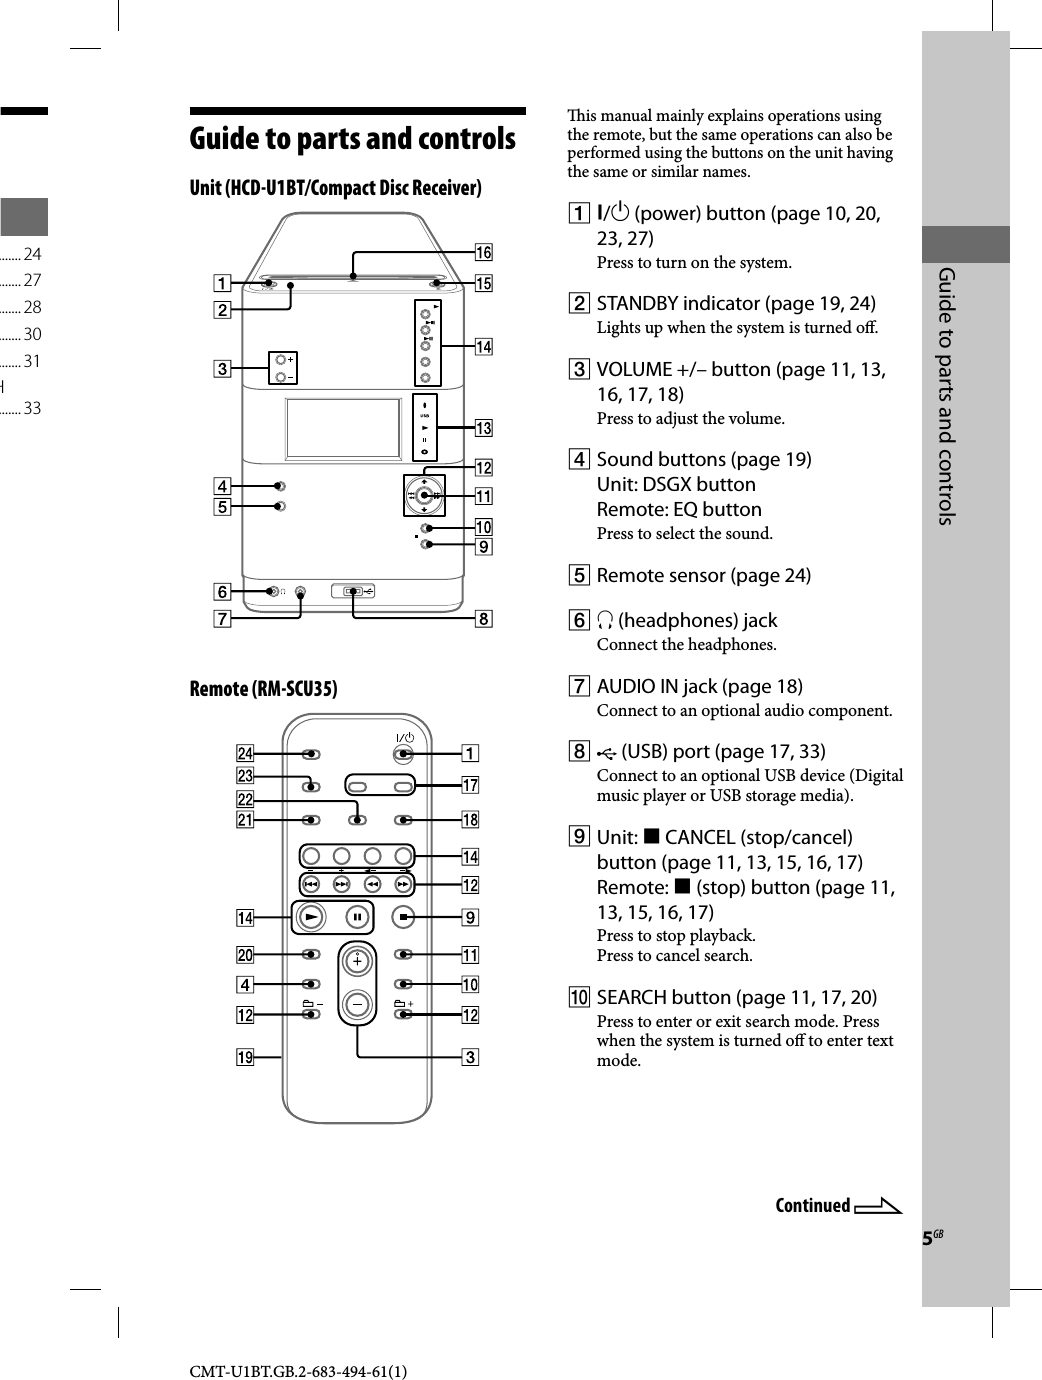 5GBGuide to parts and controlsCMT-U1BT.GB.2-683-494-61(1)  is manual mainly explains operations using the remote, but the same operations can also be performed using the buttons on the unit having the same or similar names. / (power) button (page 10, 20, 23, 27)Press to turn on the system. STANDBY indicator (page 19, 24)Lights up when the system is turned o . VOLUME +/– button (page 11, 13, 16, 17, 18)Press to adjust the volume. Sound buttons (page 19)Unit: DSGX buttonRemote: EQ buttonPress to select the sound. Remote sensor (page 24)  (headphones) jackConnect the headphones. AUDIO IN jack (page 18)Connect to an optional audio component.  (USB) port (page 17, 33)Connect to an optional USB device (Digital music player or USB storage media). Unit:  CANCEL (stop/cancel) button (page 11, 13, 15, 16, 17)Remote:  (stop) button (page 11, 13, 15, 16, 17)Press to stop playback. Press to cancel search. SEARCH button (page 11, 17, 20)Press to enter or exit search mode. Press when the system is turned o  to enter text mode.Guide to parts and controlsUnit (HCD-U1BT/Compact Disc Receiver)Remote (RM-SCU35)Continued ....... 24....... 27....... 28....... 30....... 31H ....... 33